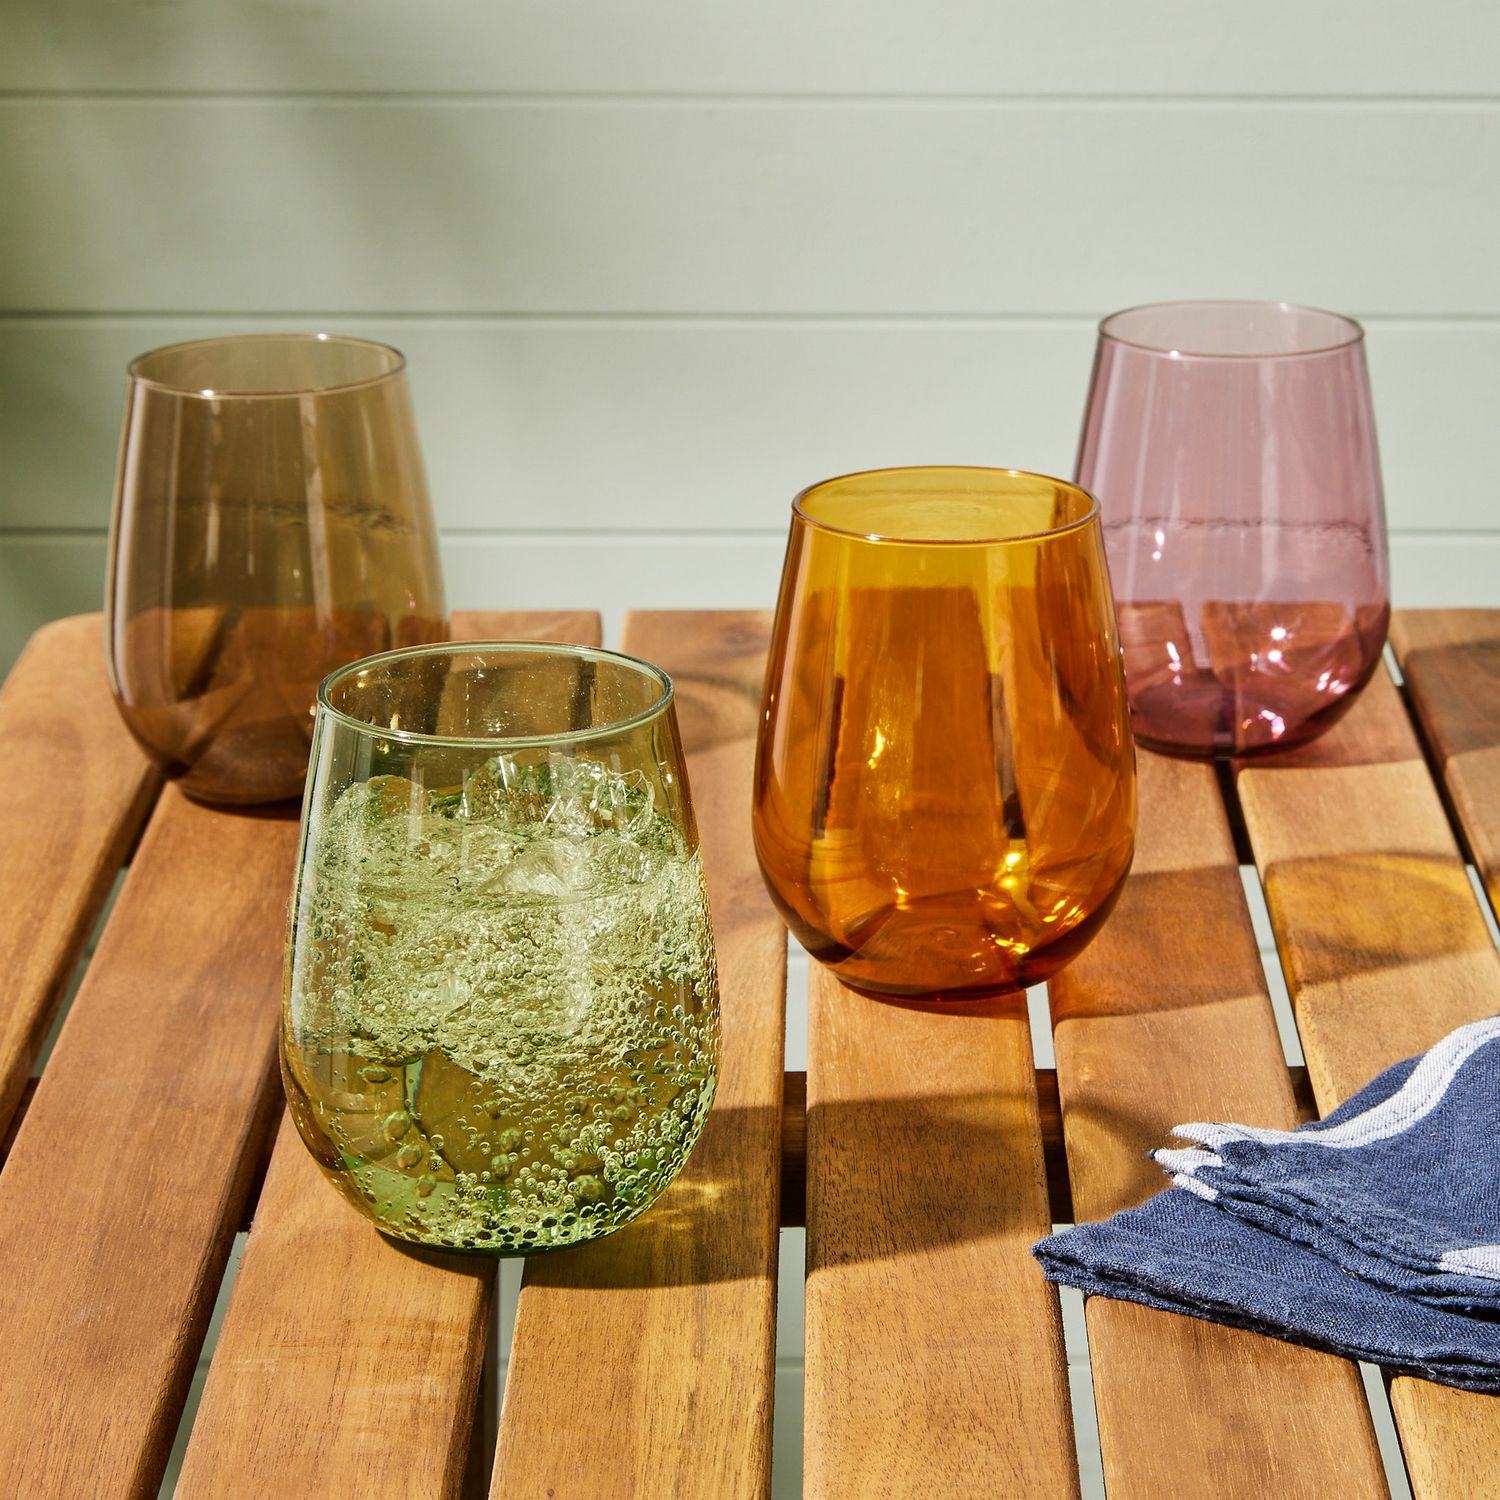 Tossware Reserve Tritan Copolyester Stemless Champagne Flutes, Set of 4 on  Food52